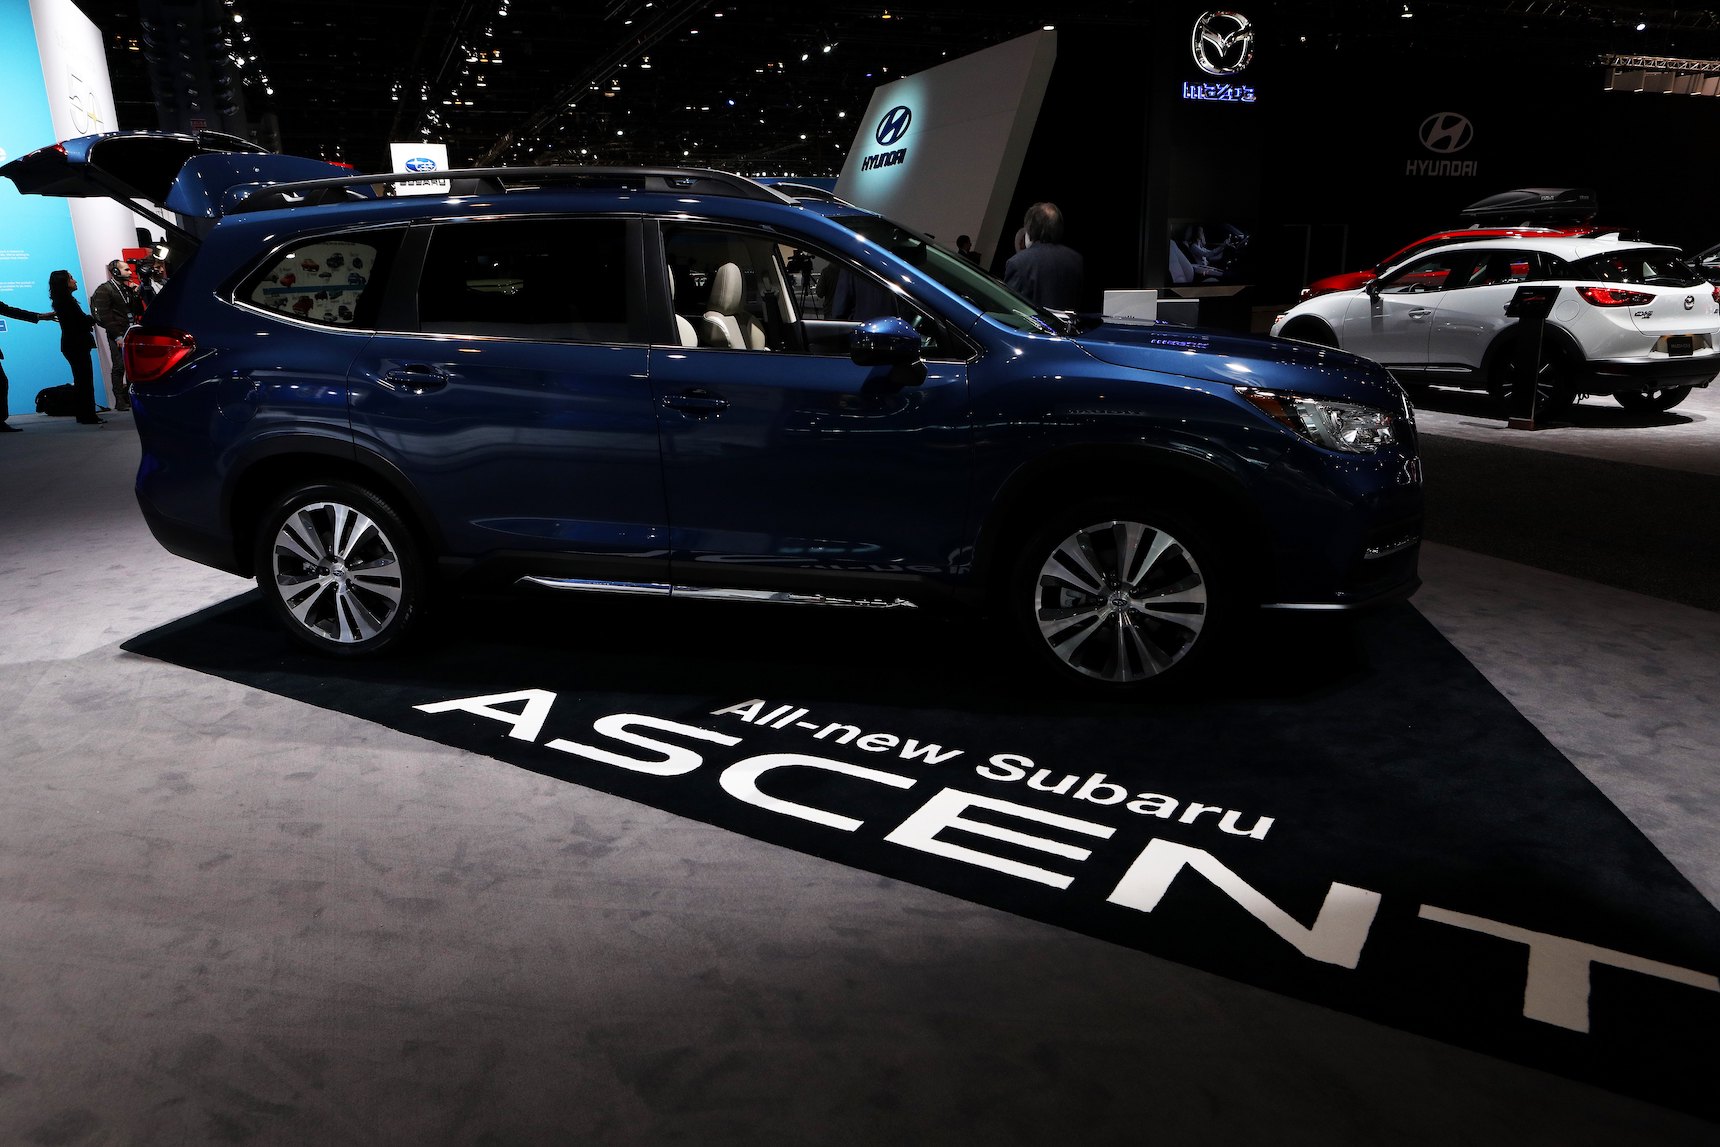 A predecessor of the 2020 Ascent is on display at the 110th Annual Chicago Auto Show